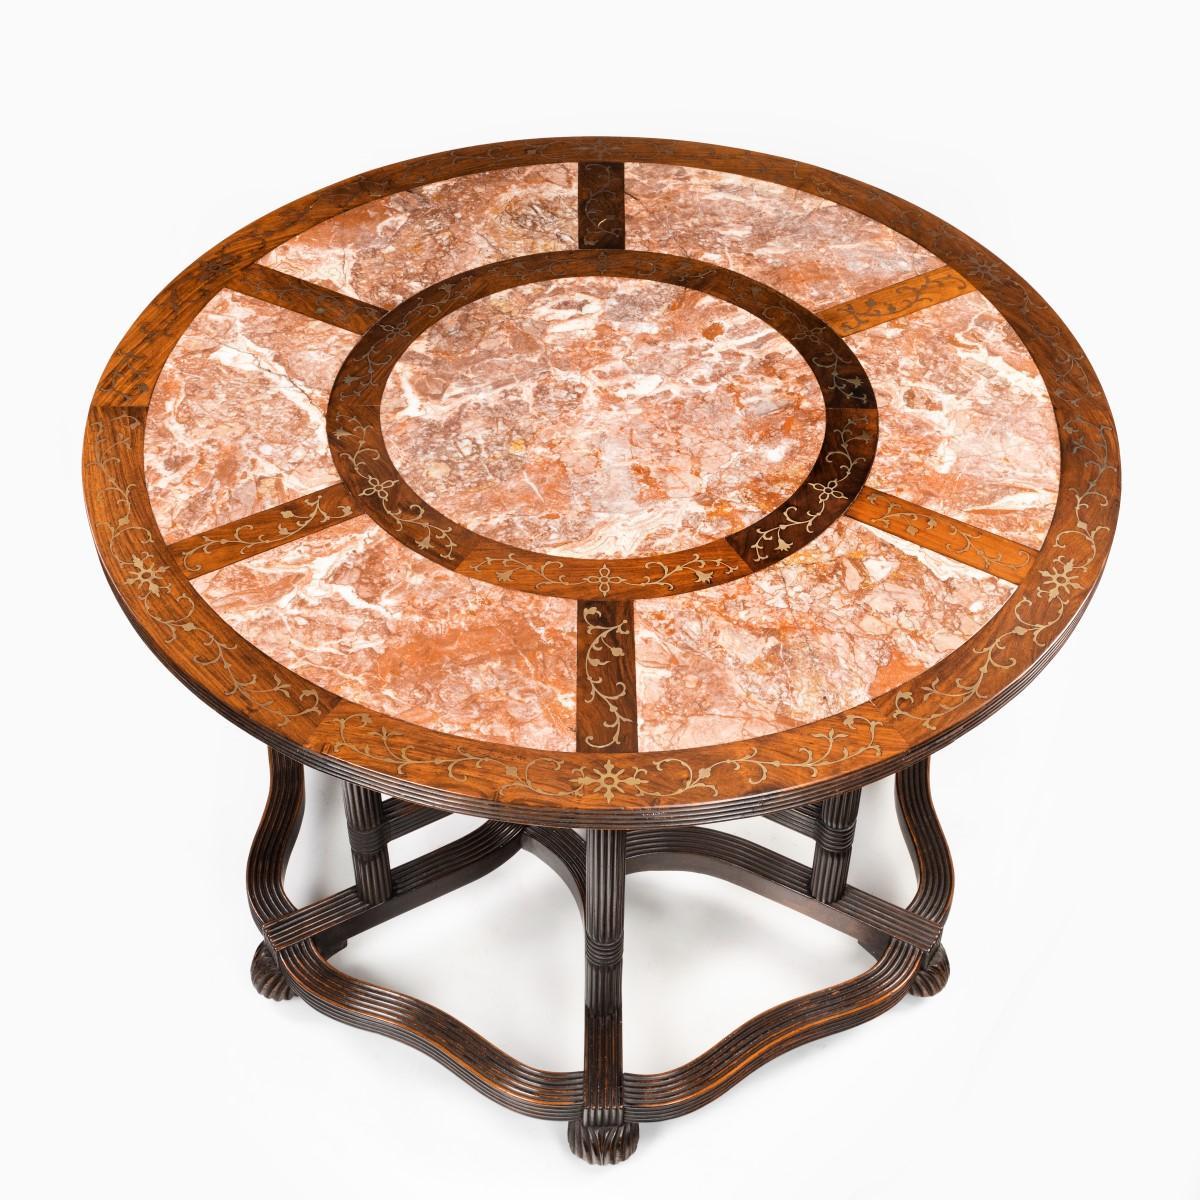 A rare Anglo-Chinese hardwood picnic table, in three sections, the circular top inlaid with six rouge marble segments centred on a roundel, the frame inlaid in brass with delicate leafy scrolls, the six reeded legs centred on a carved knot boss and